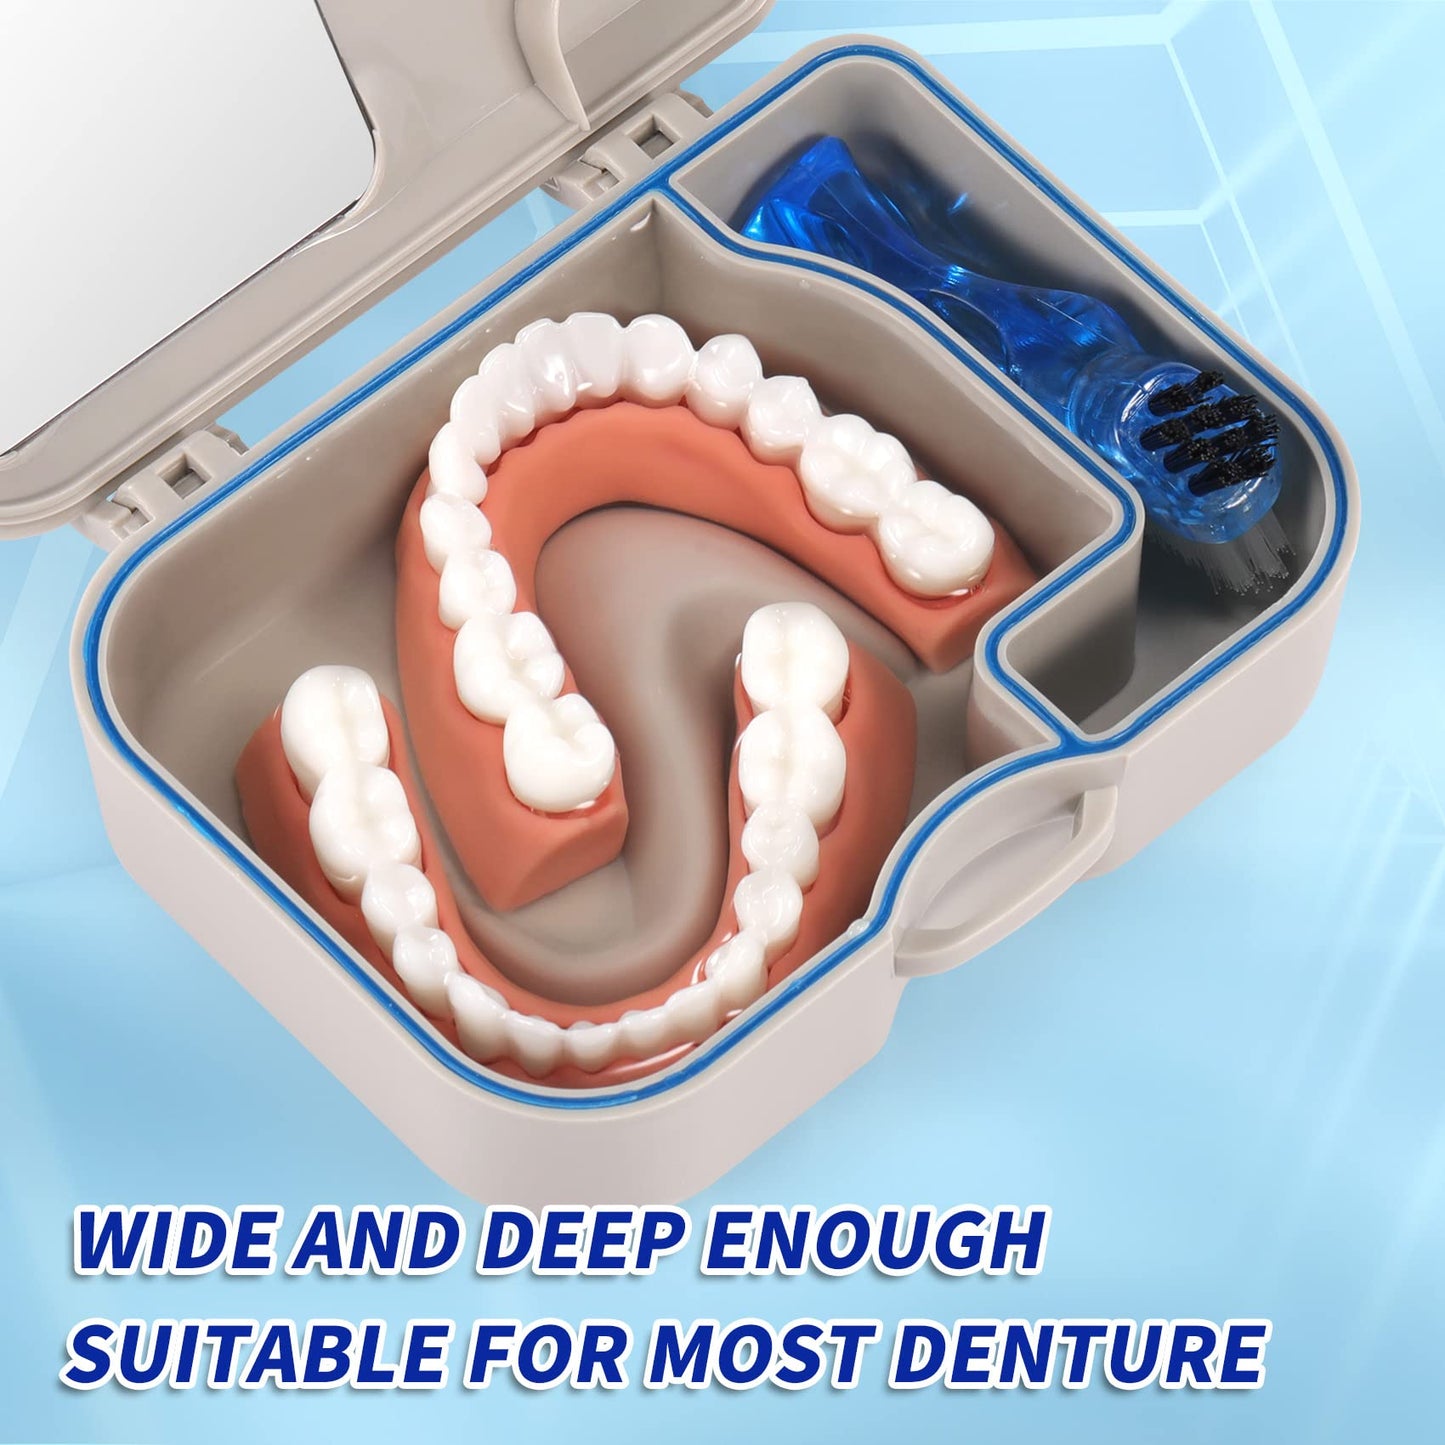 Denture Cup Bath Box Case with Mirror and Cleaning Brush, Dental Case with Brush Retainer Cleaning Case Mouth Guard Storage Soaking Cup Holder for Travel, Office, Household Use